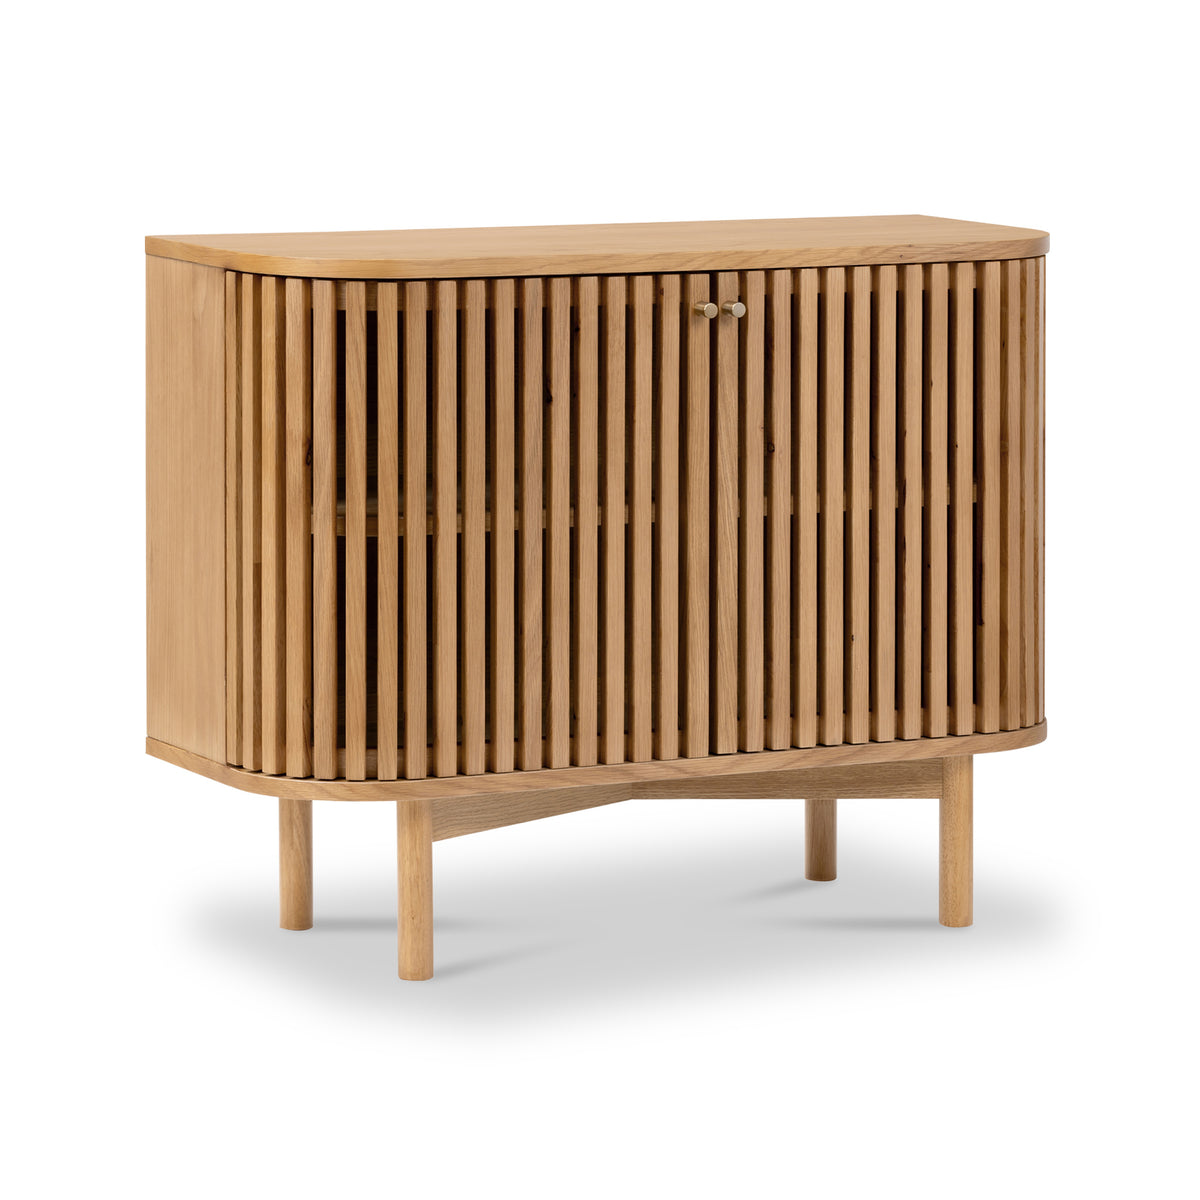 Shorwell Small Sideboard from Roseland Furniture